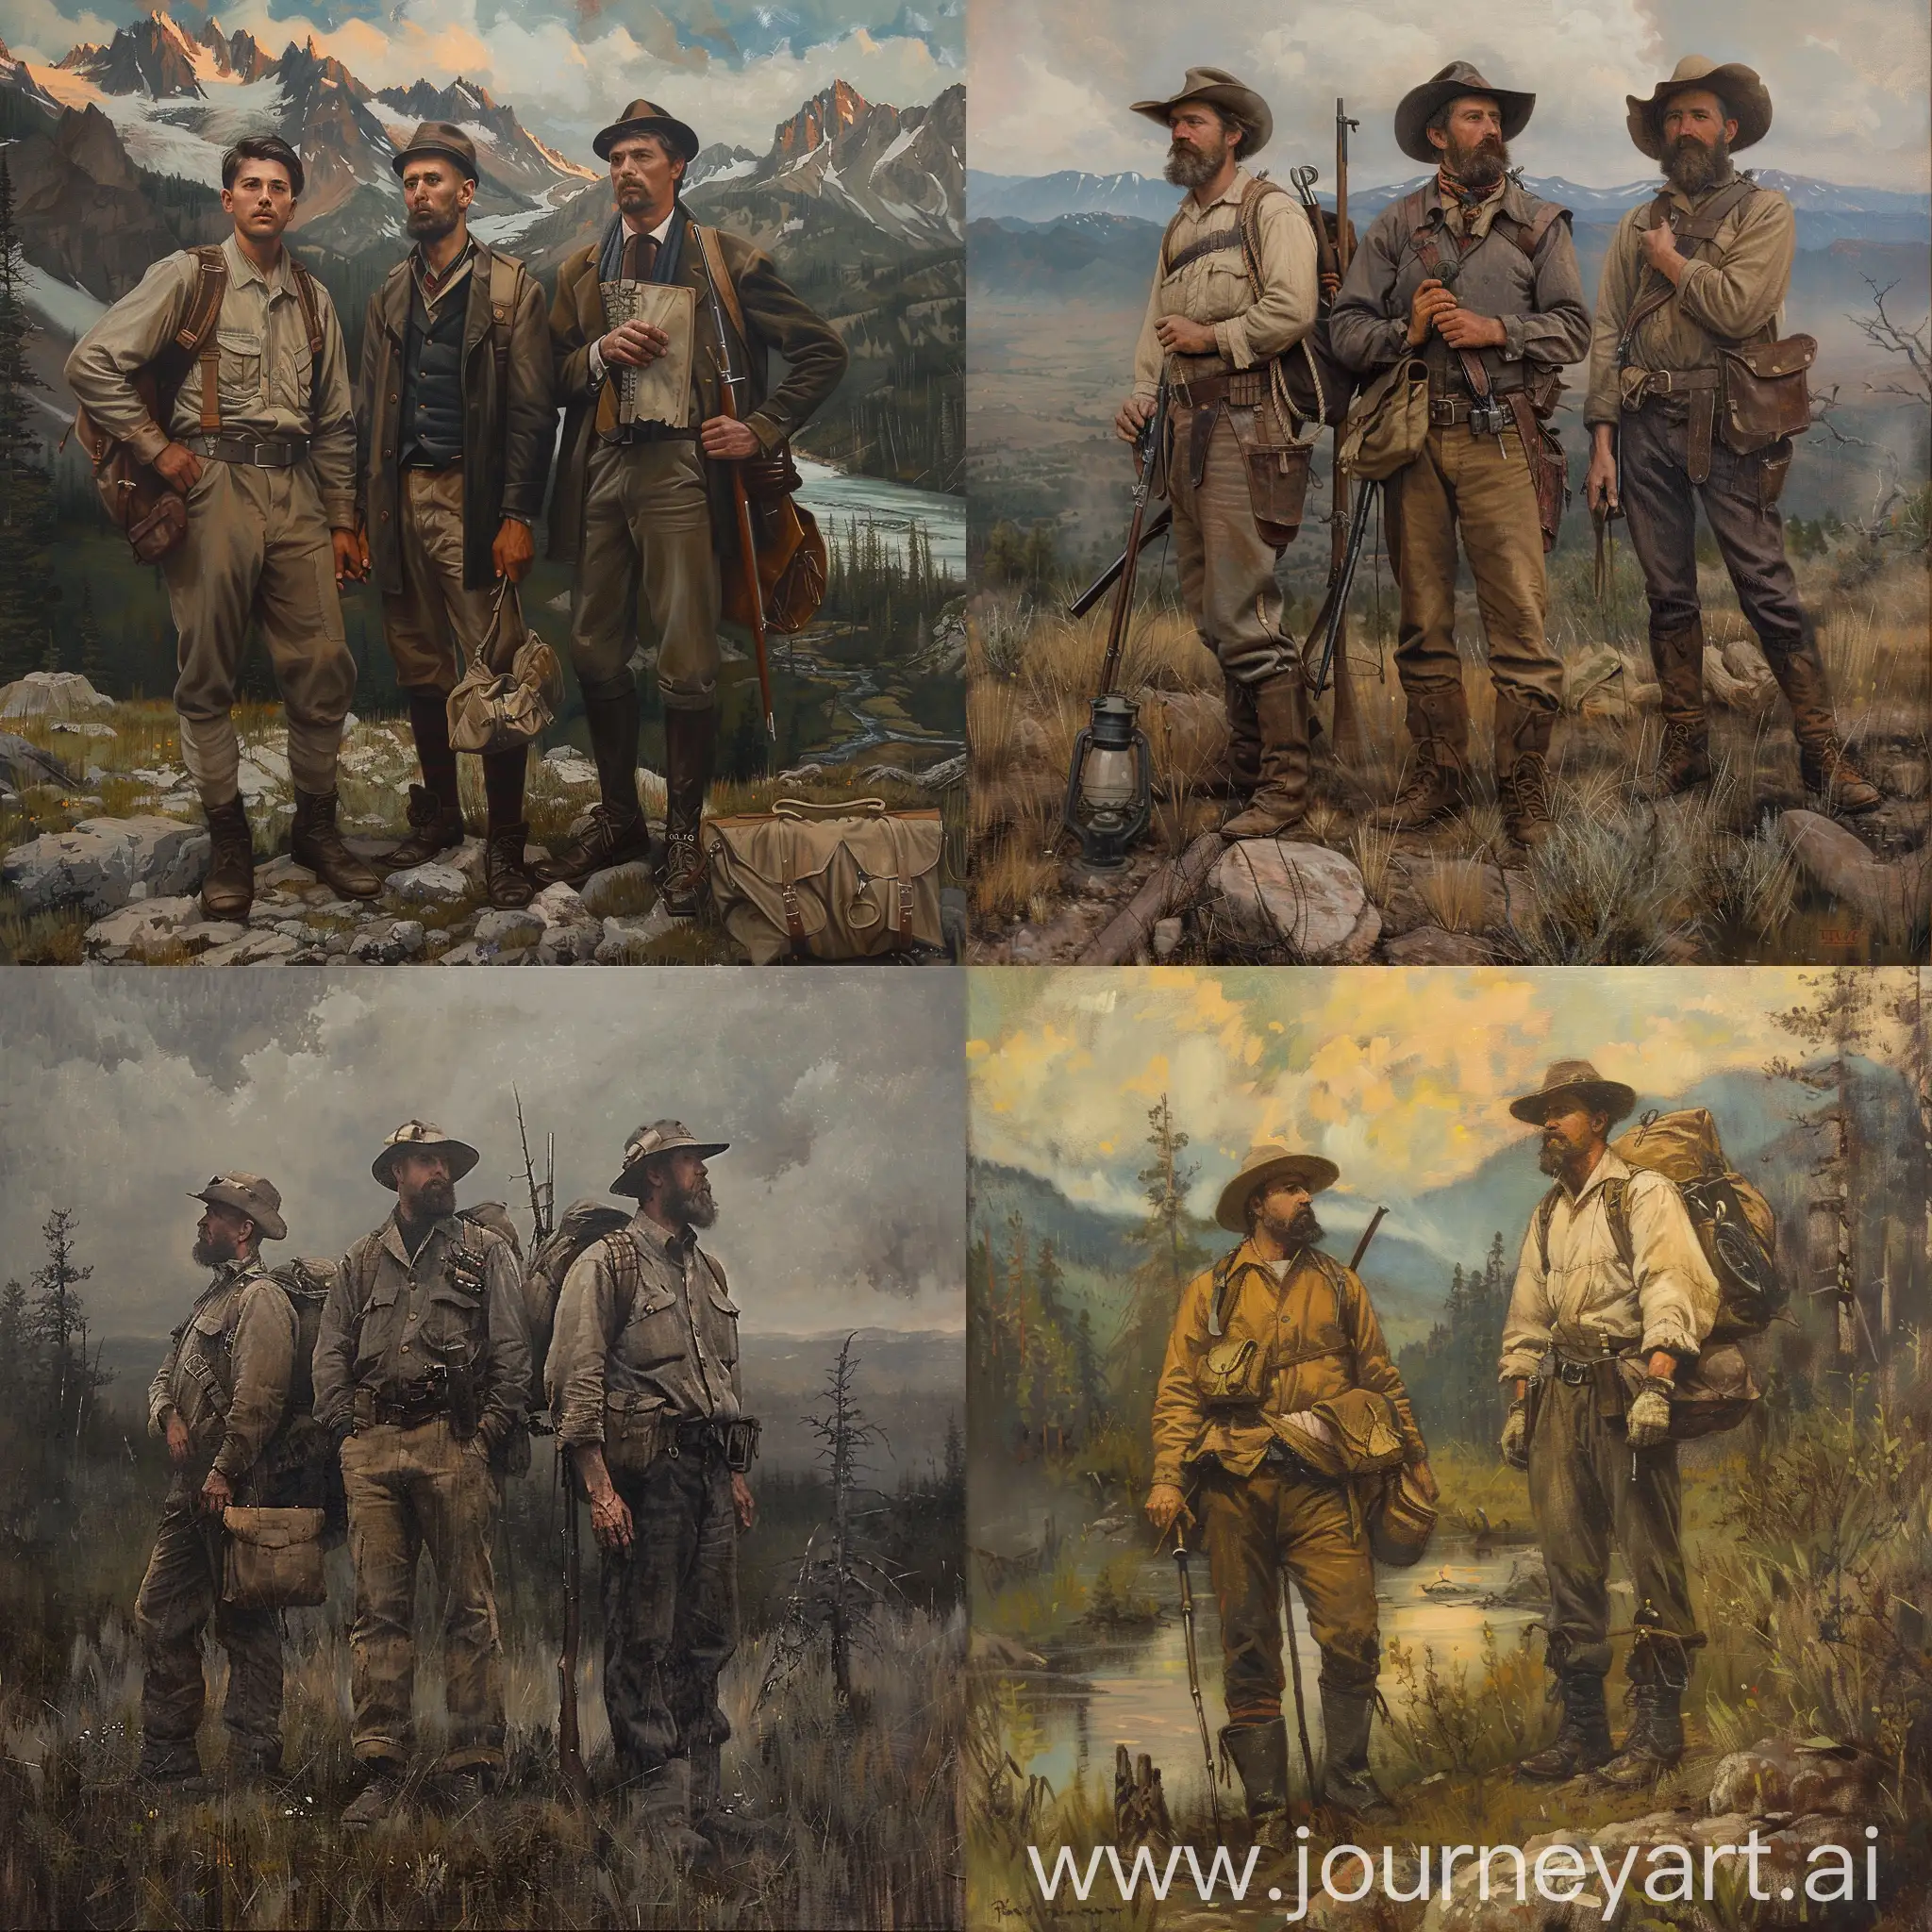 Early-20thCentury-Explorers-in-Wilderness-Discovery-Painting